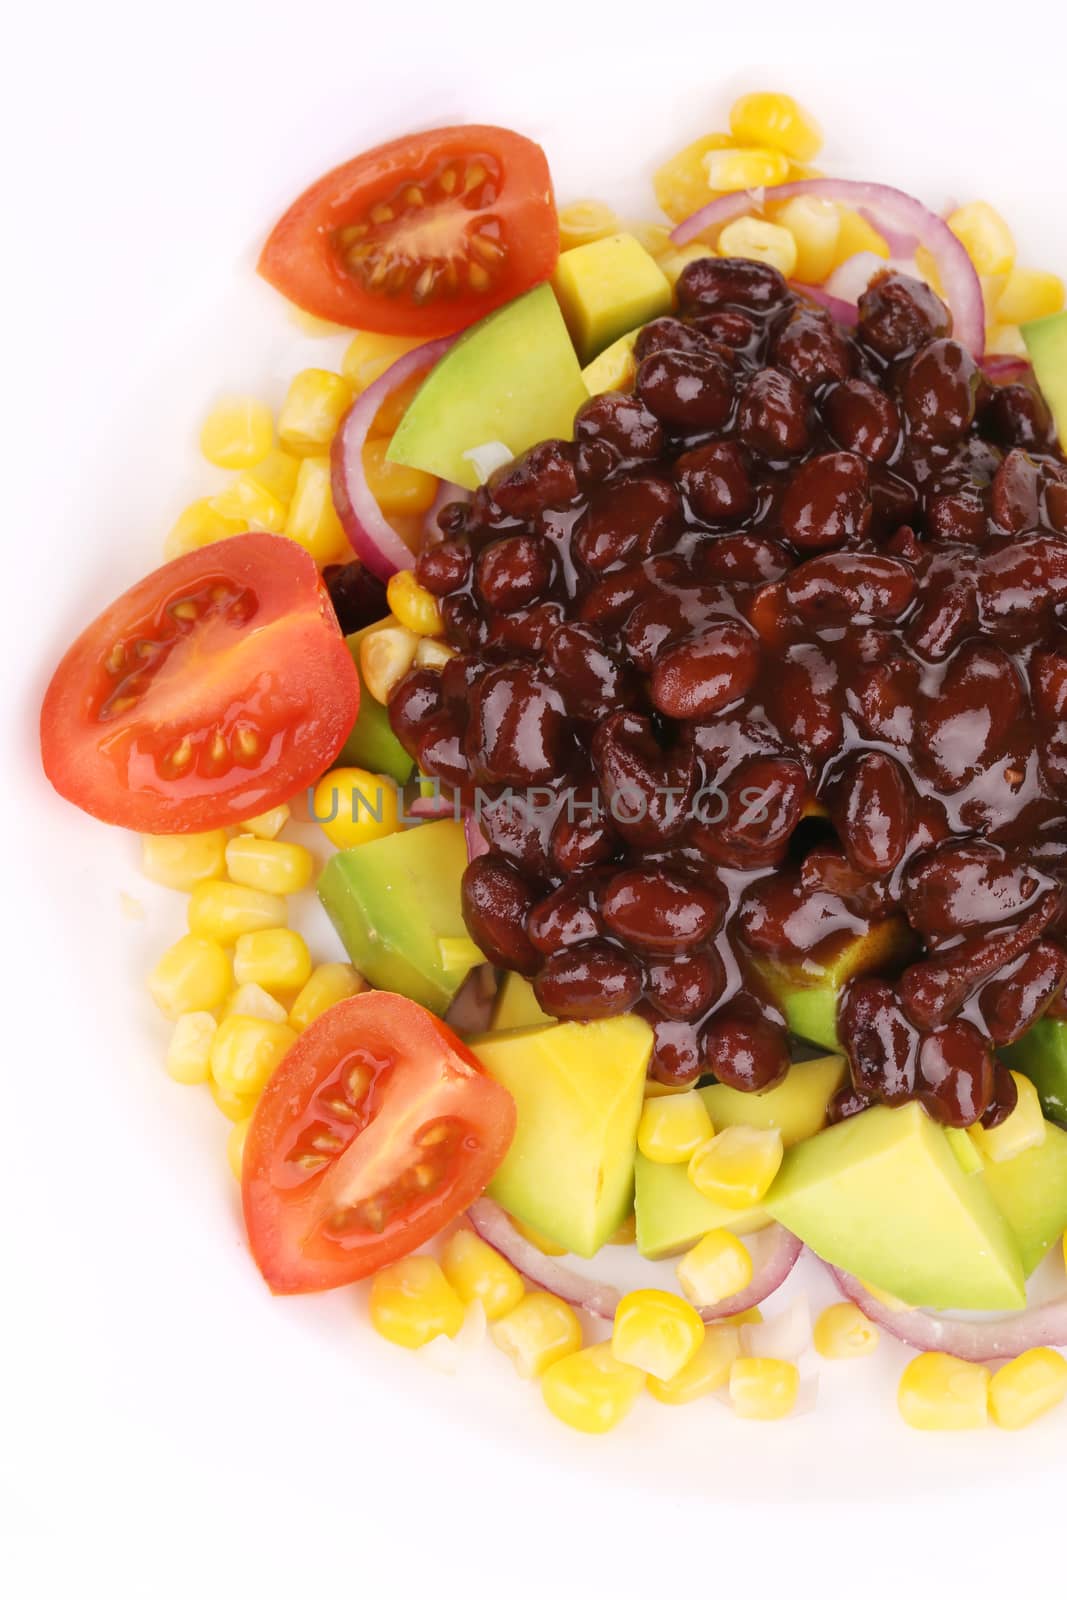 Red beans salad. Isolated on a white background.